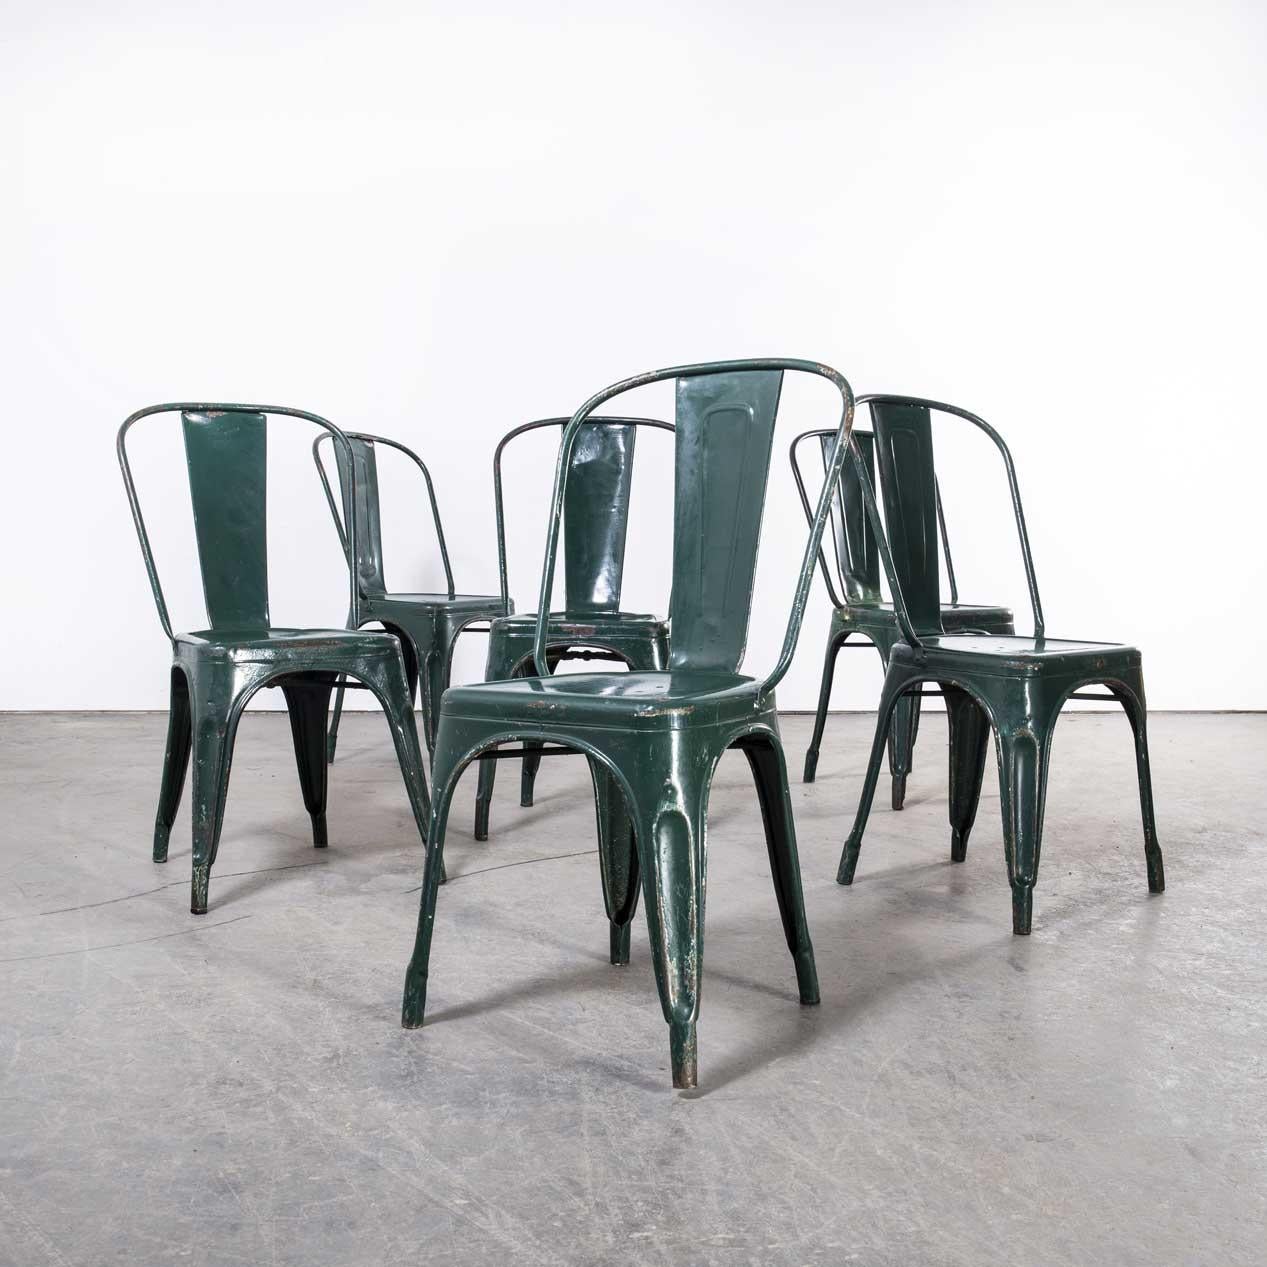 1950?s Original Tolix Model A Dining Outdoor Chairs – Set Of Six (1643)
1950?s Original Tolix Model A Dining Outdoor Chairs ? Set Of Six. Tolix is one of our all time favourite companies. In 1907 Frenchman Xavier Pauchard discovered that he could